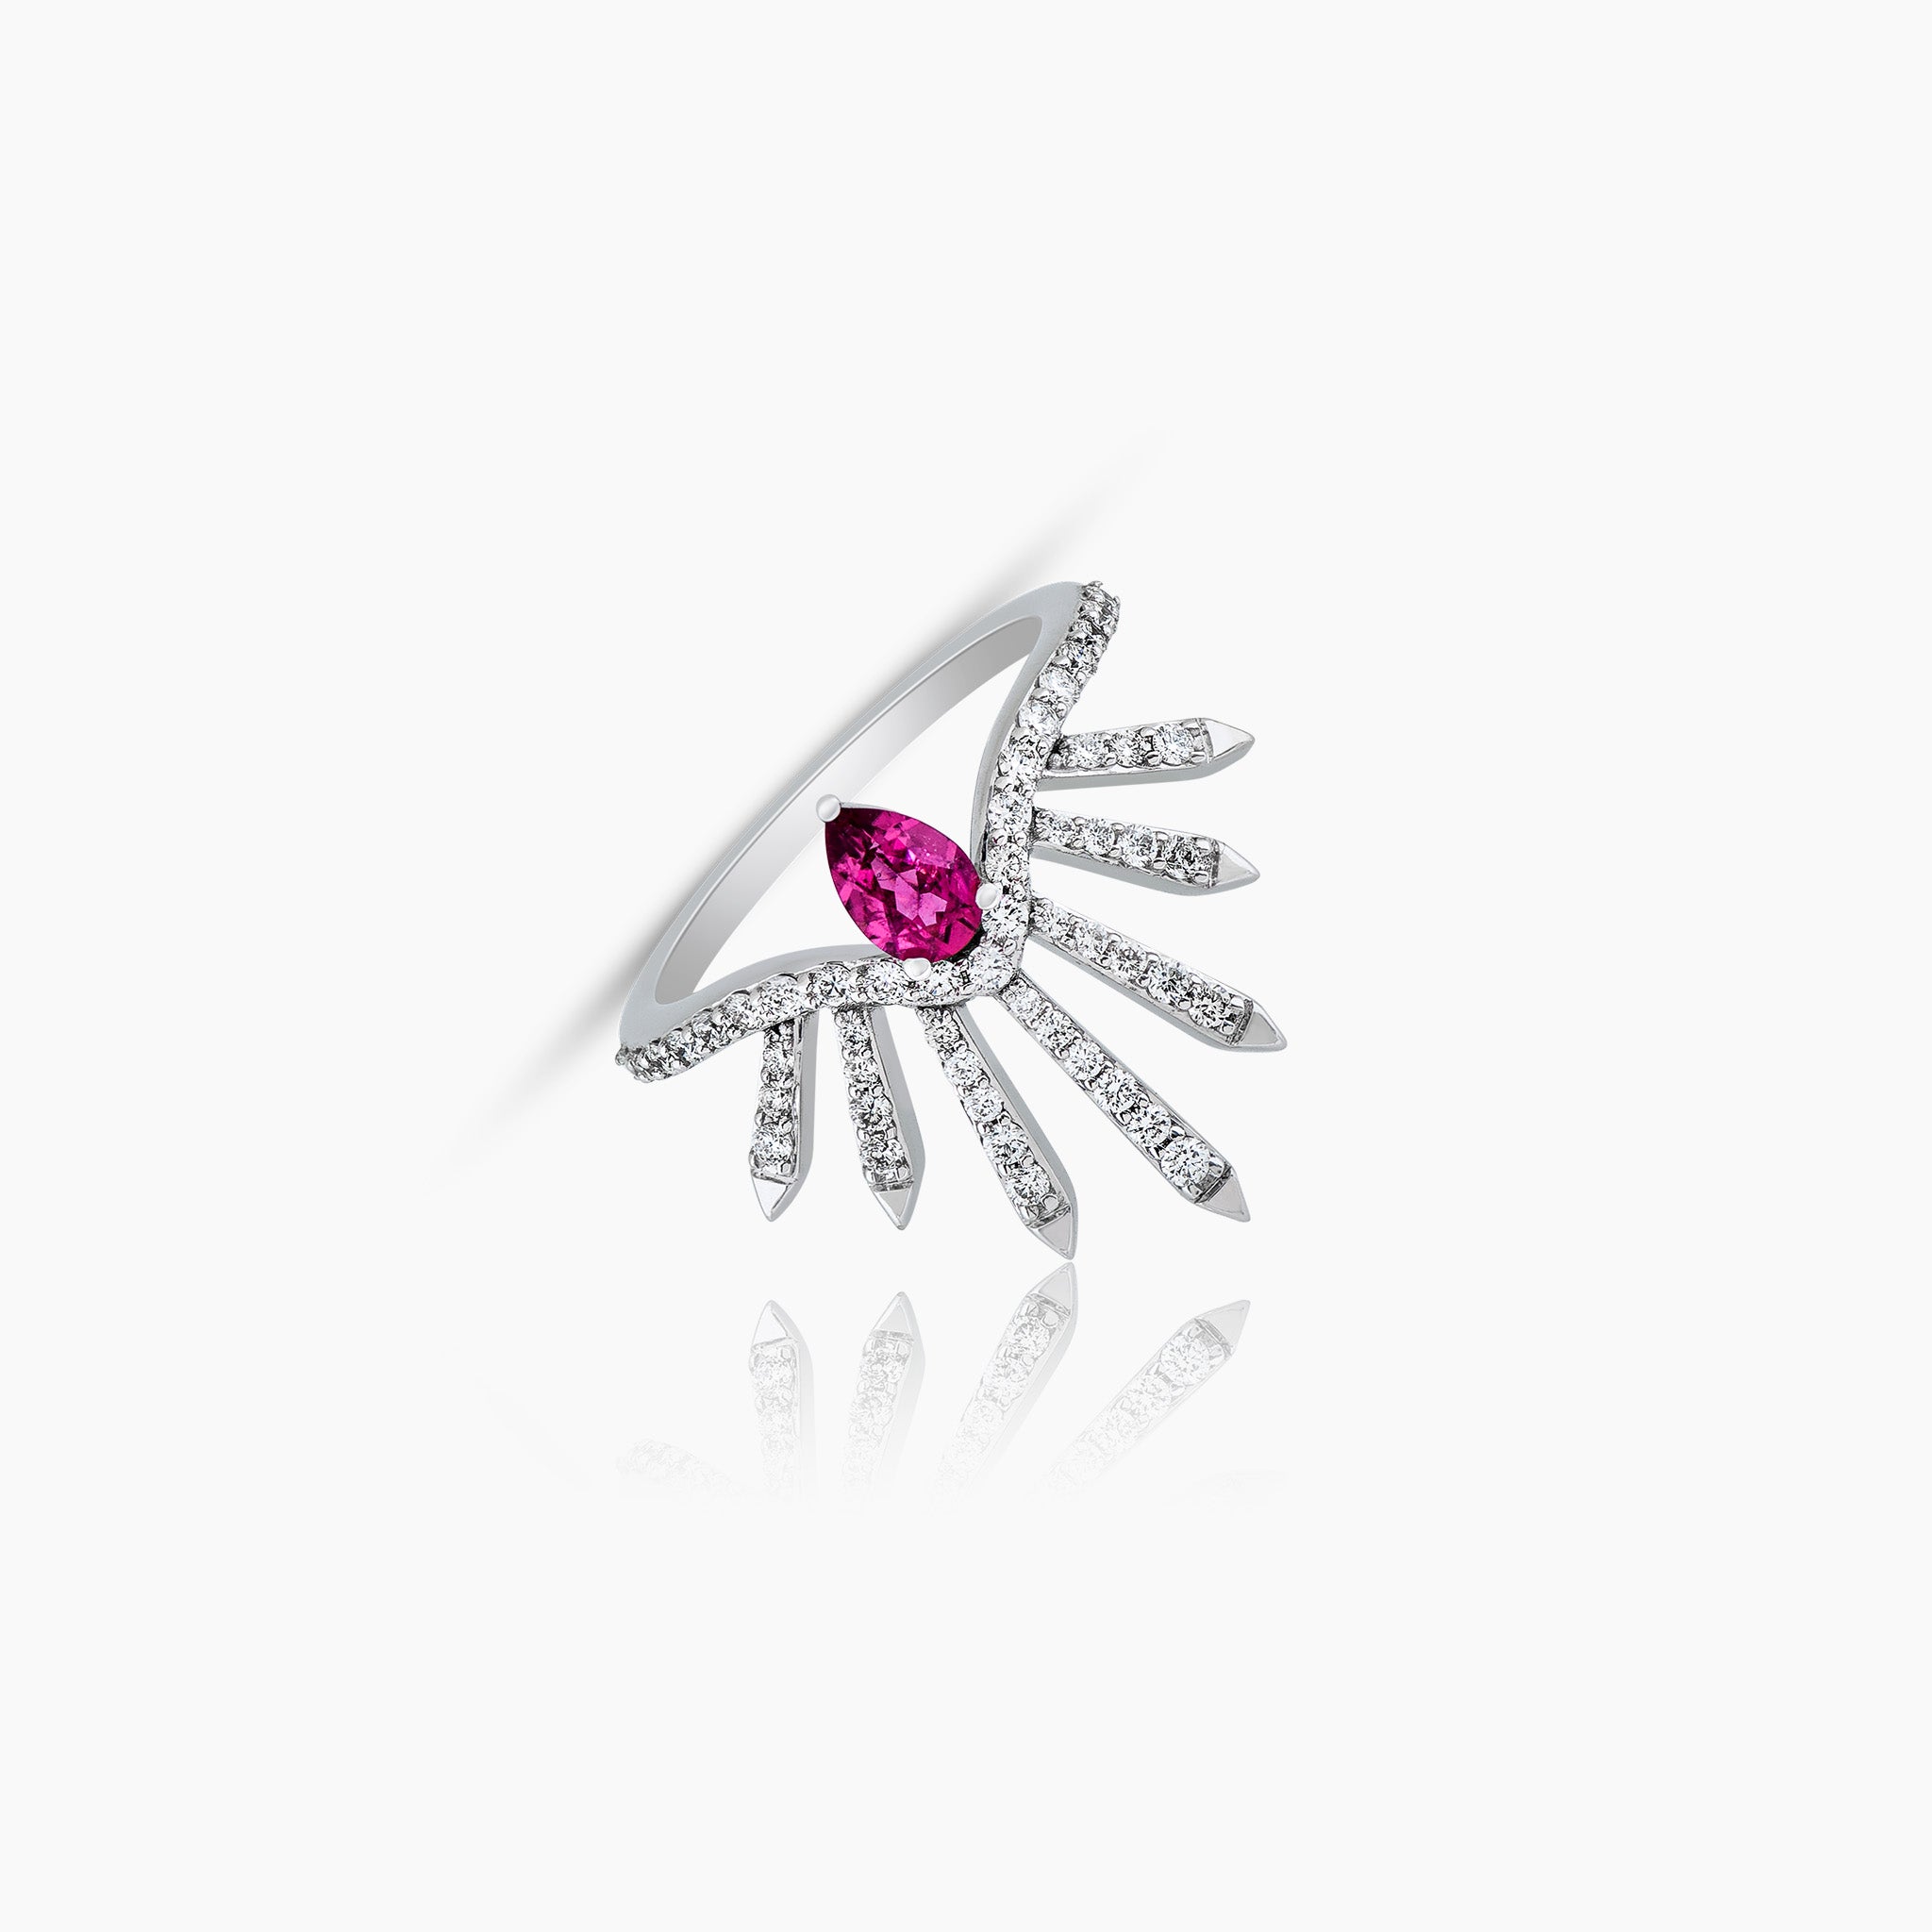 Dragon Ring: Crafted in white gold and adorned with a single rubellite pear and diamonds, displayed against an off-white background.